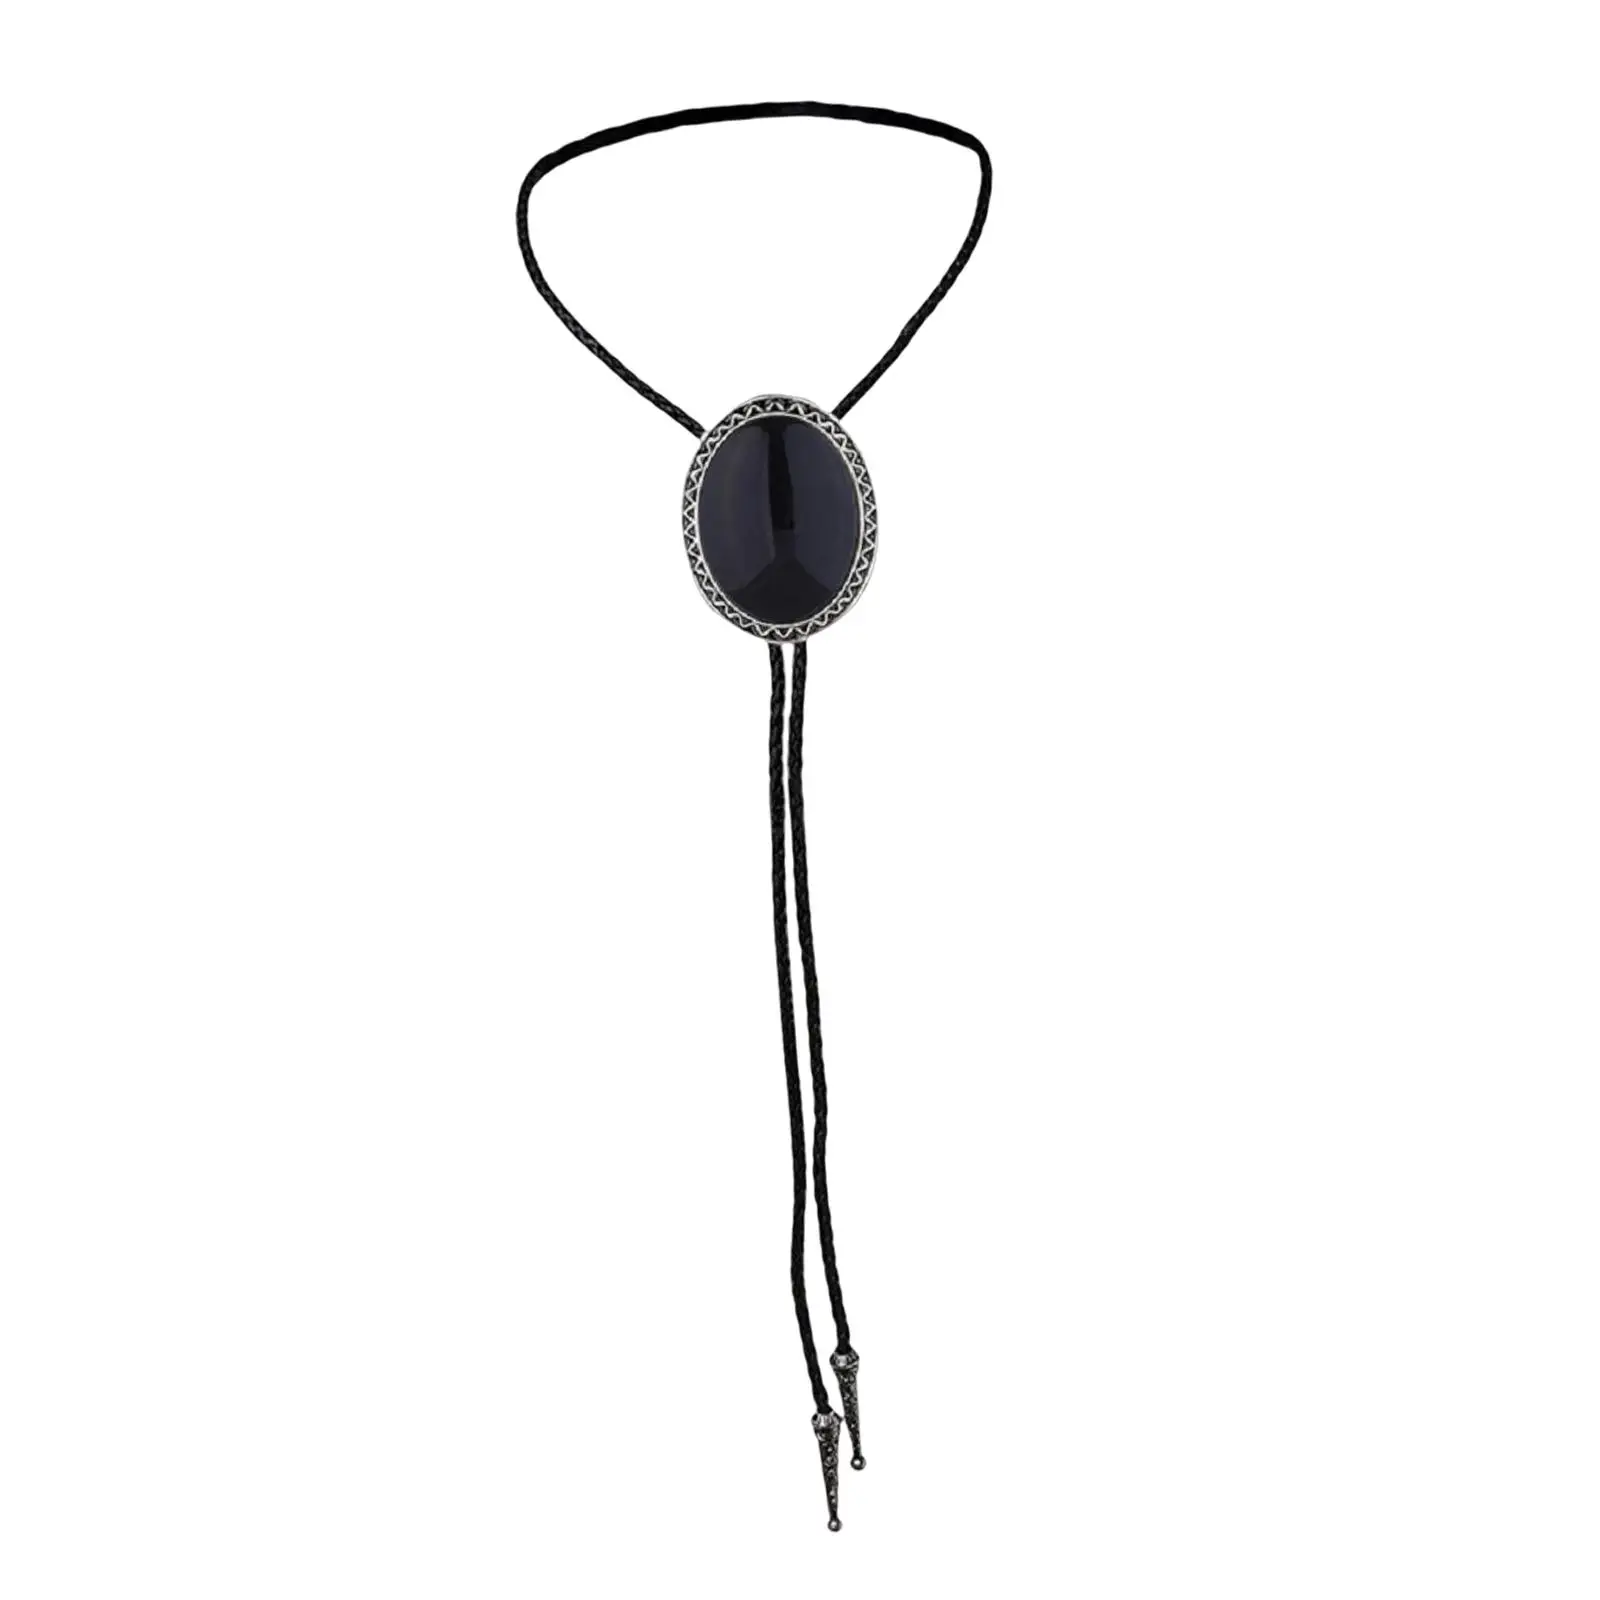 PU Leather Bolo Tie Necktie Costume Handmade Necklace Wedding Adjustable for Shirts Unisex Carnival Prom Fancy Dress